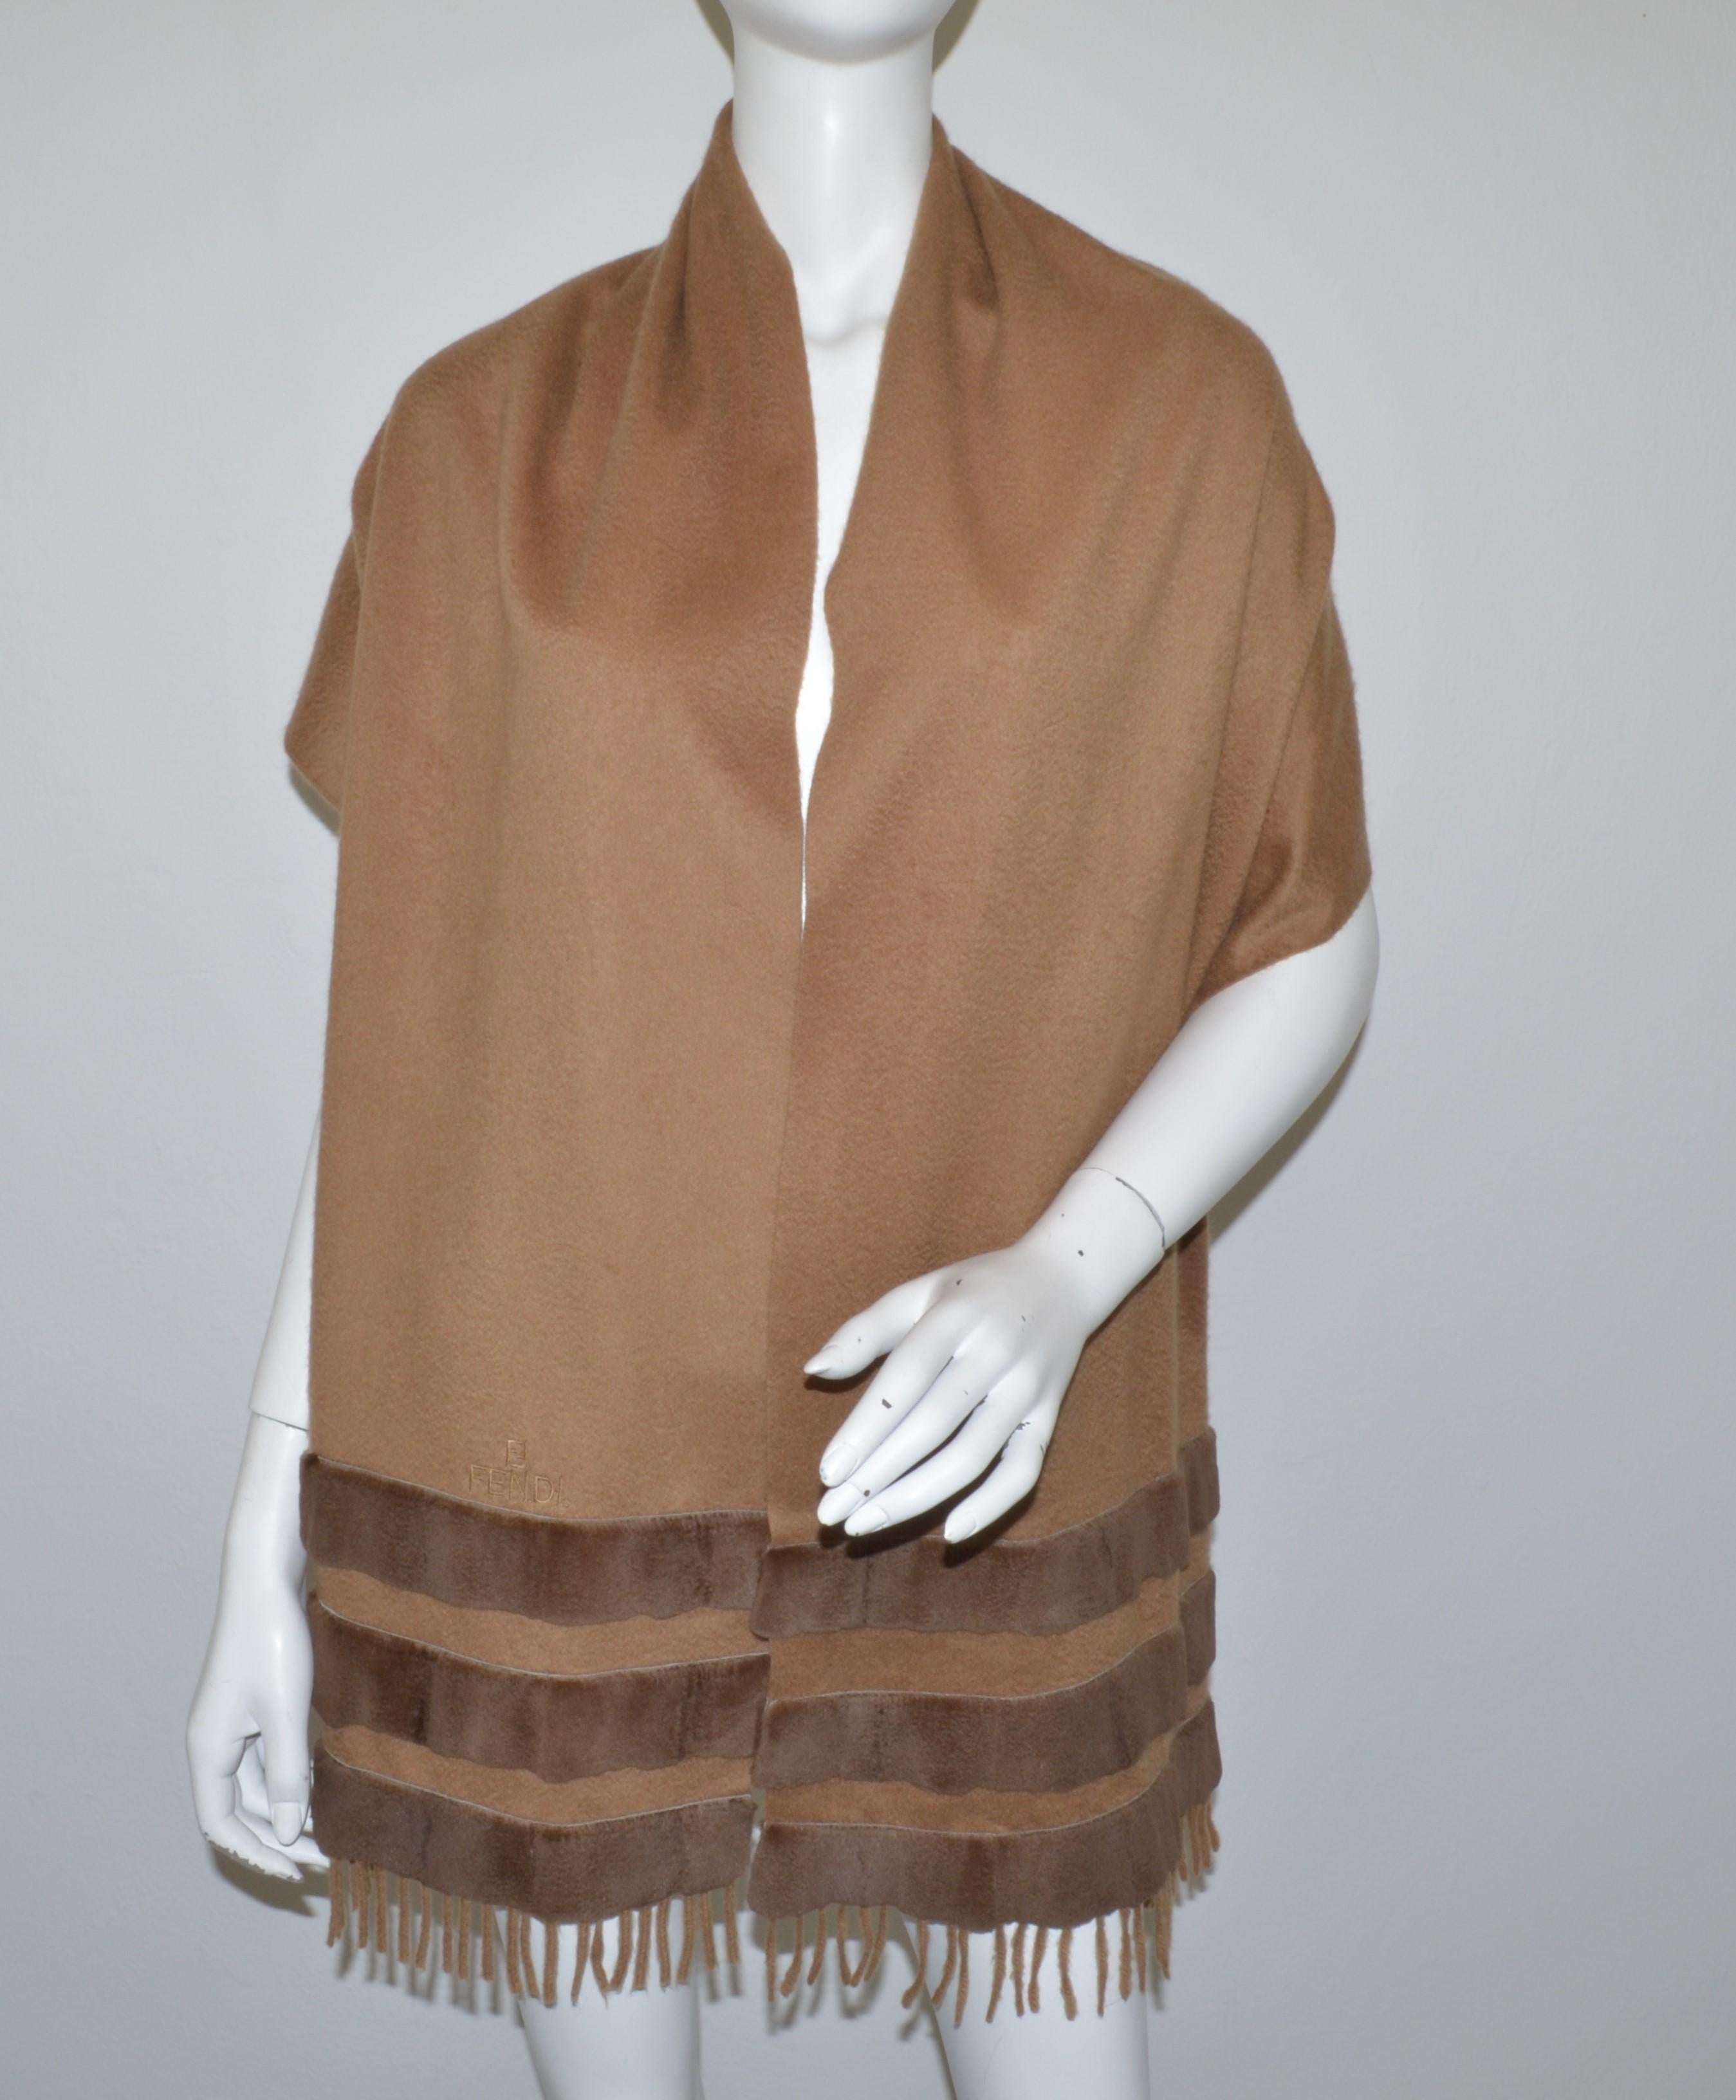 Fendi Brown Cashmere Shawl with Mink Fur Trim -- featured in a camel color with sheared mink stripes at the ends and a fringed trim. Made in Italy. Excellent pre-owned condition.

Measurements:
Length - 72”
Width - 17.5”